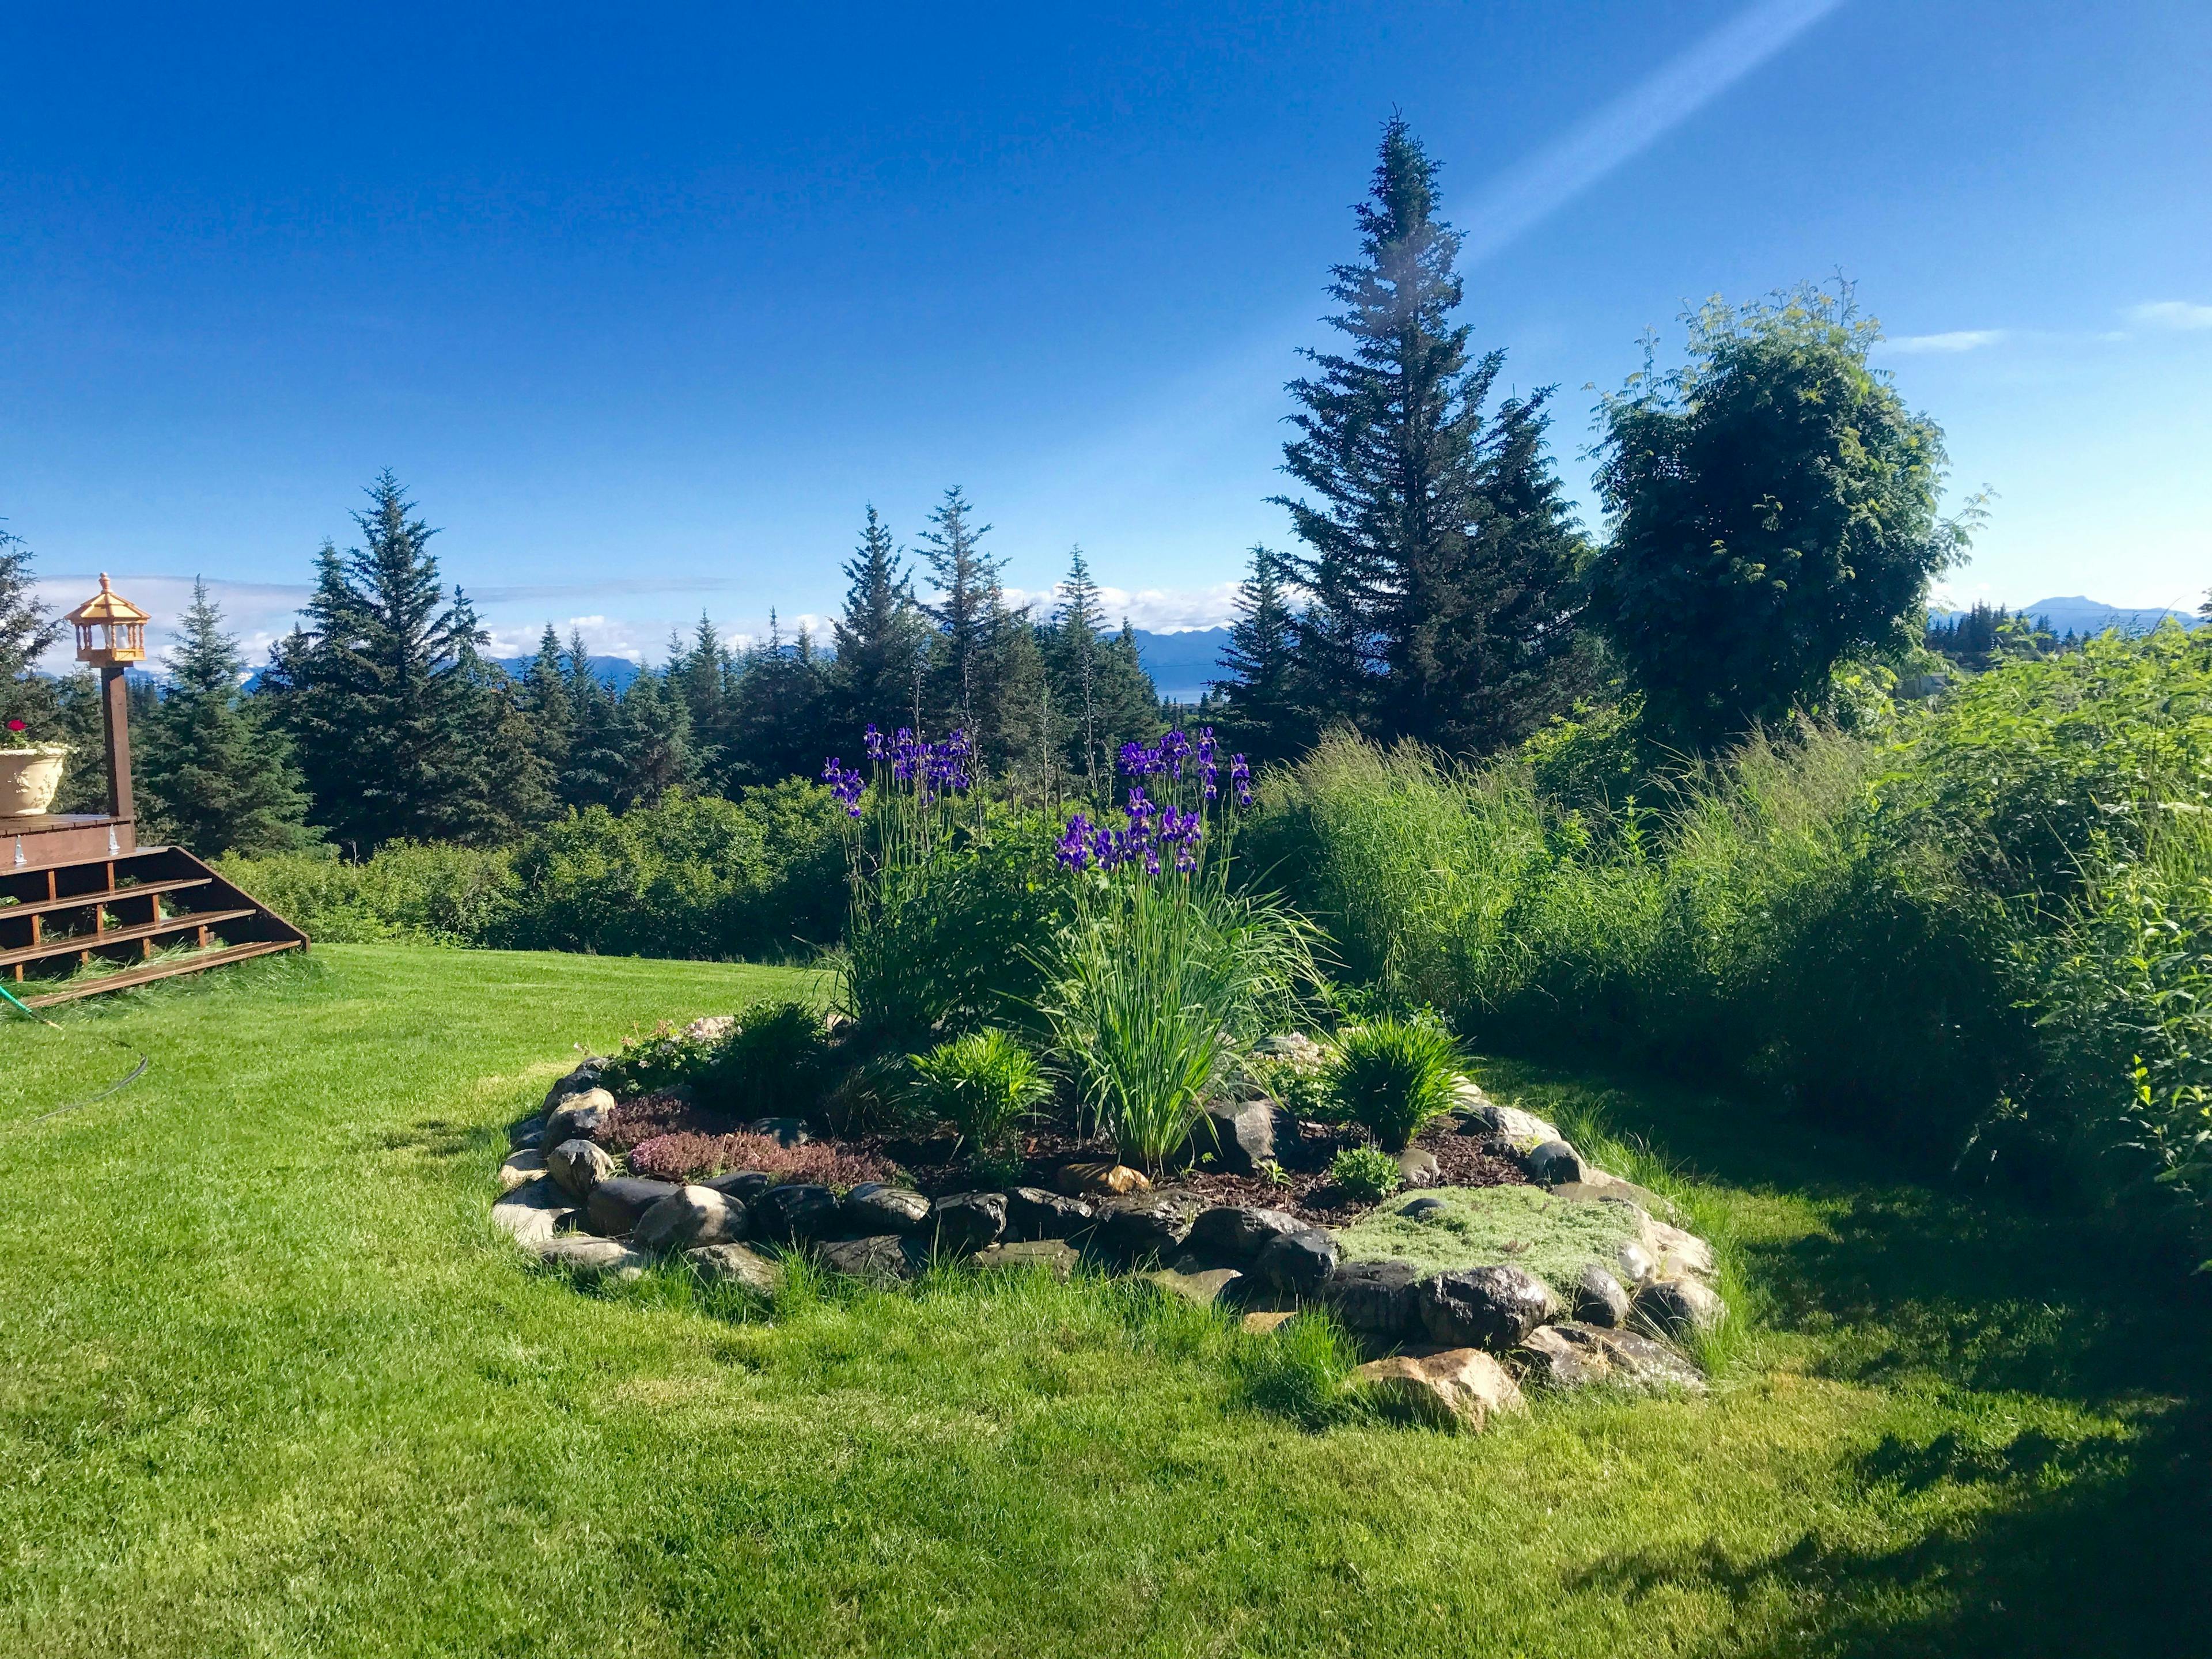 One of the beautiful gardens at Cozy Cove Inn with a brilliant blue sky and a thin cloud streak.